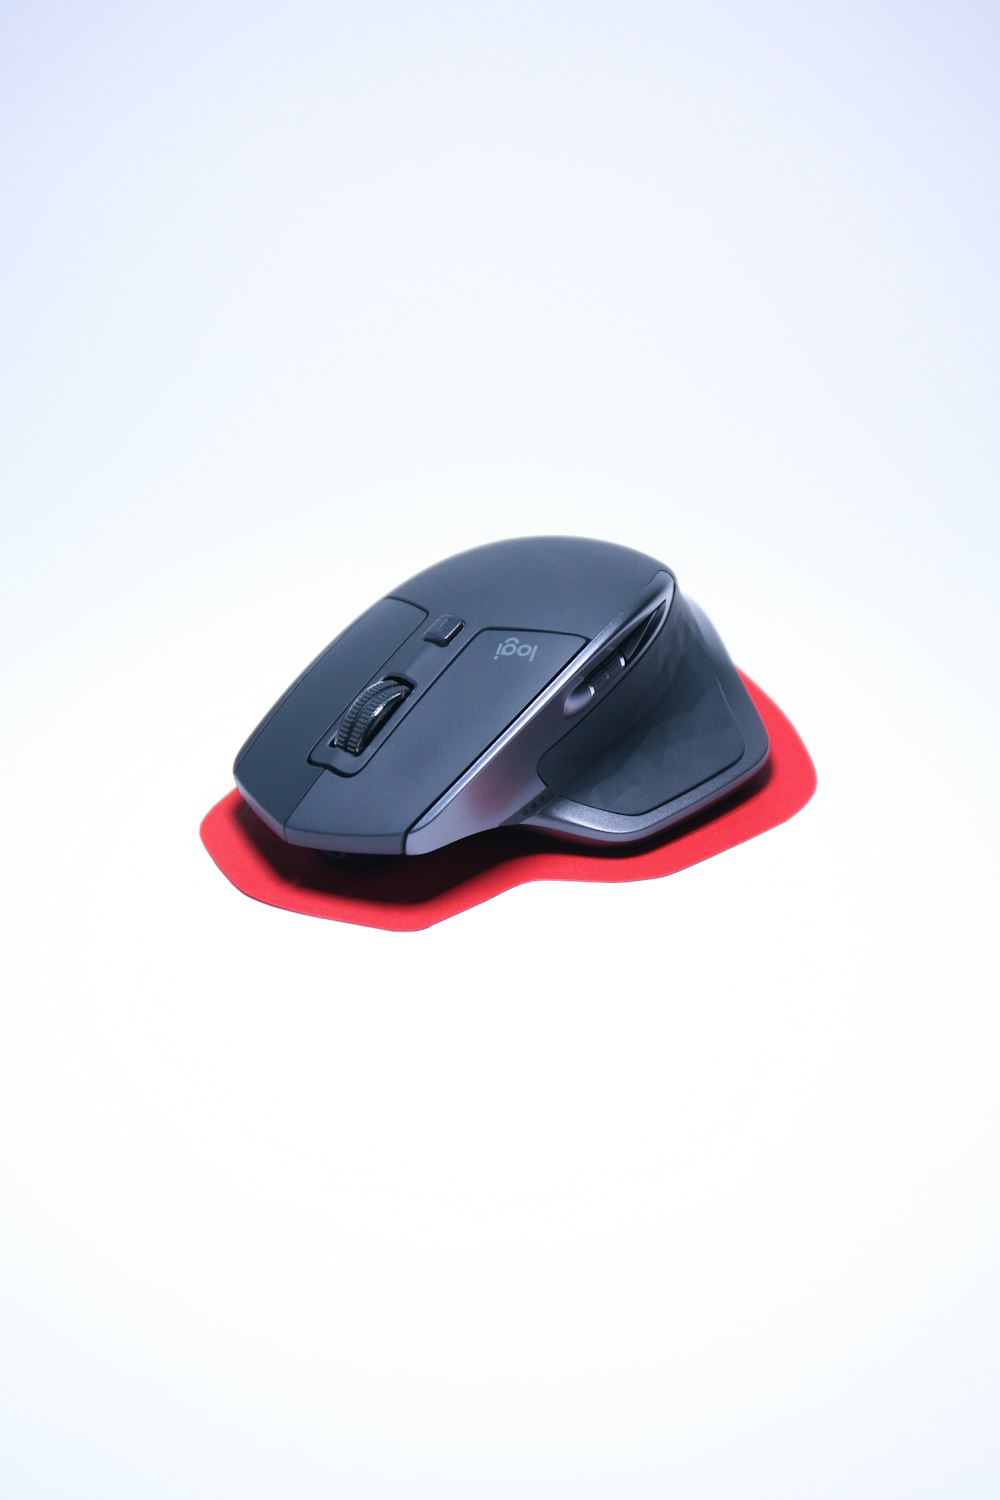 black and red cordless computer mouse